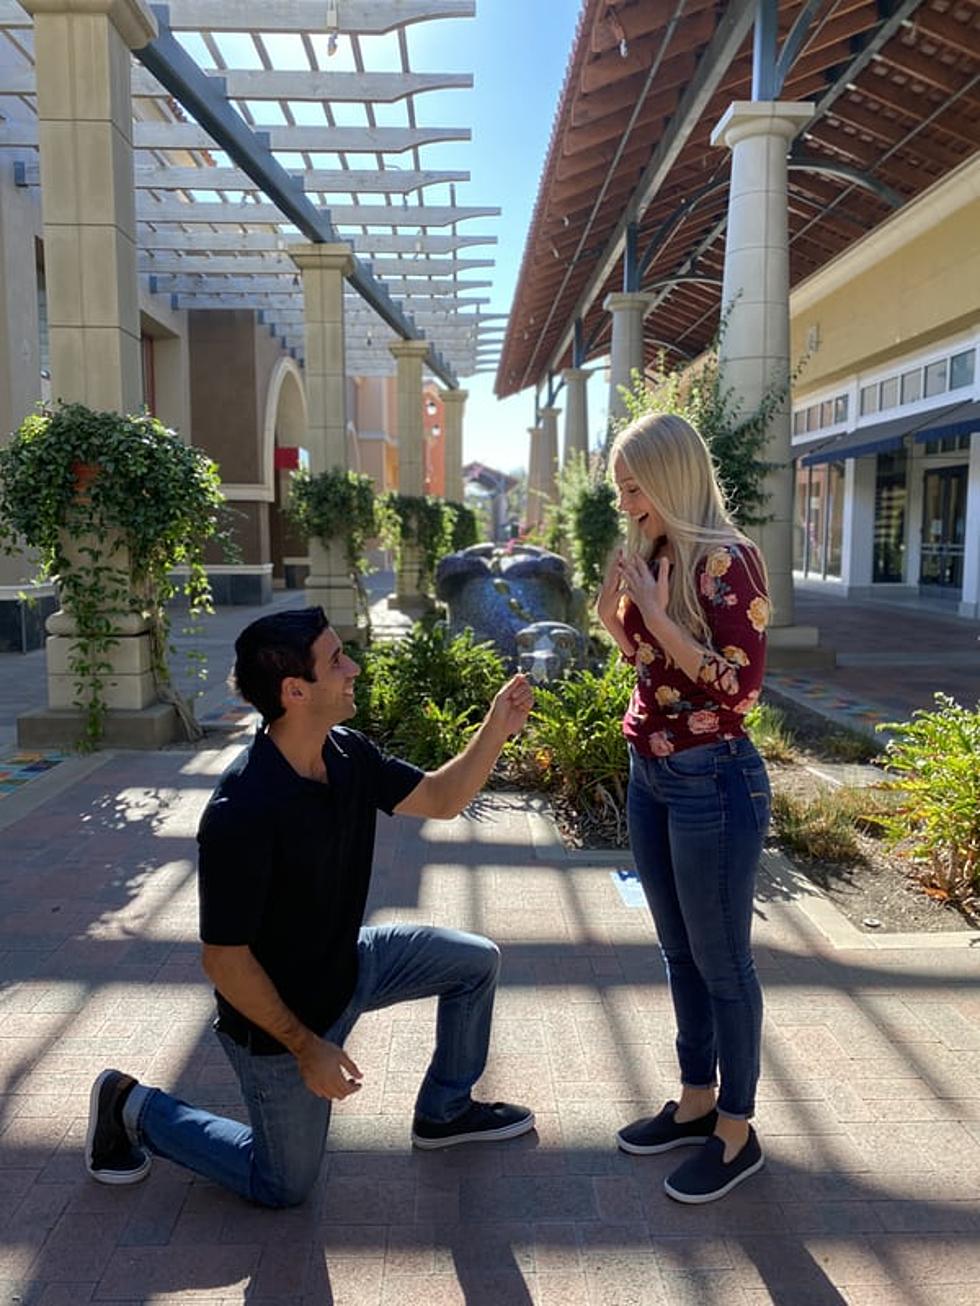 She Rejected His Proposal, Now What?